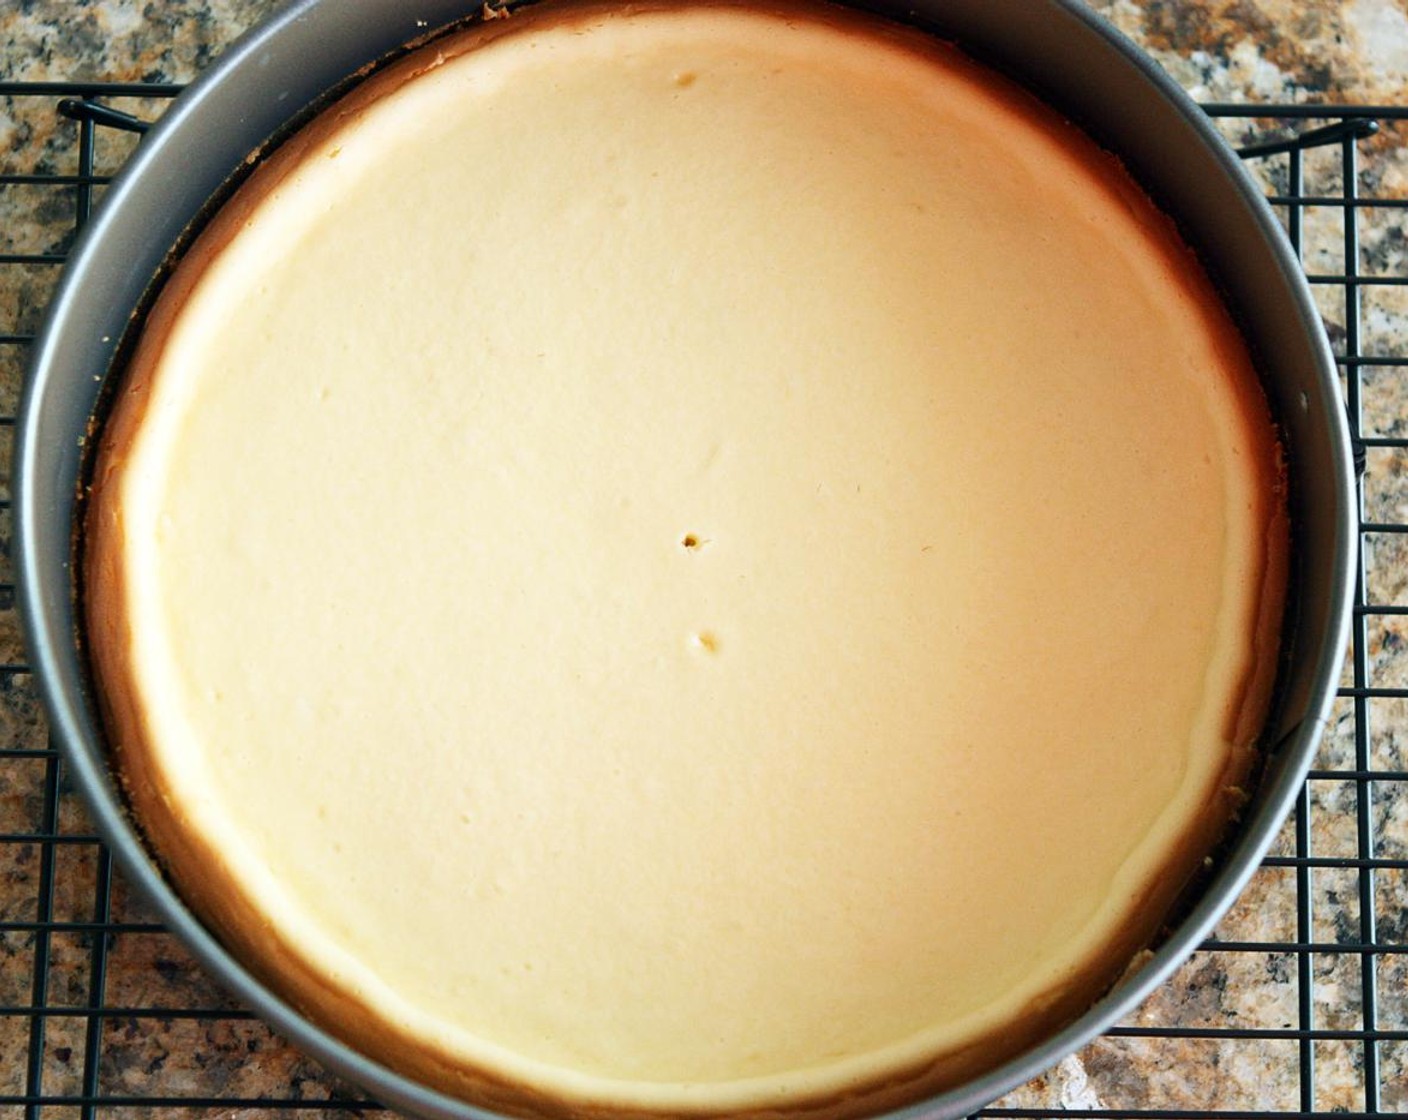 step 10 Bake for 45-50 minutes until the center of the cheesecake is not jiggling. Remove to a cooling rack and run a knife around the edges of the pan. The cheesecake will deflate as it cools. Cool to room temperature, then refrigerate.